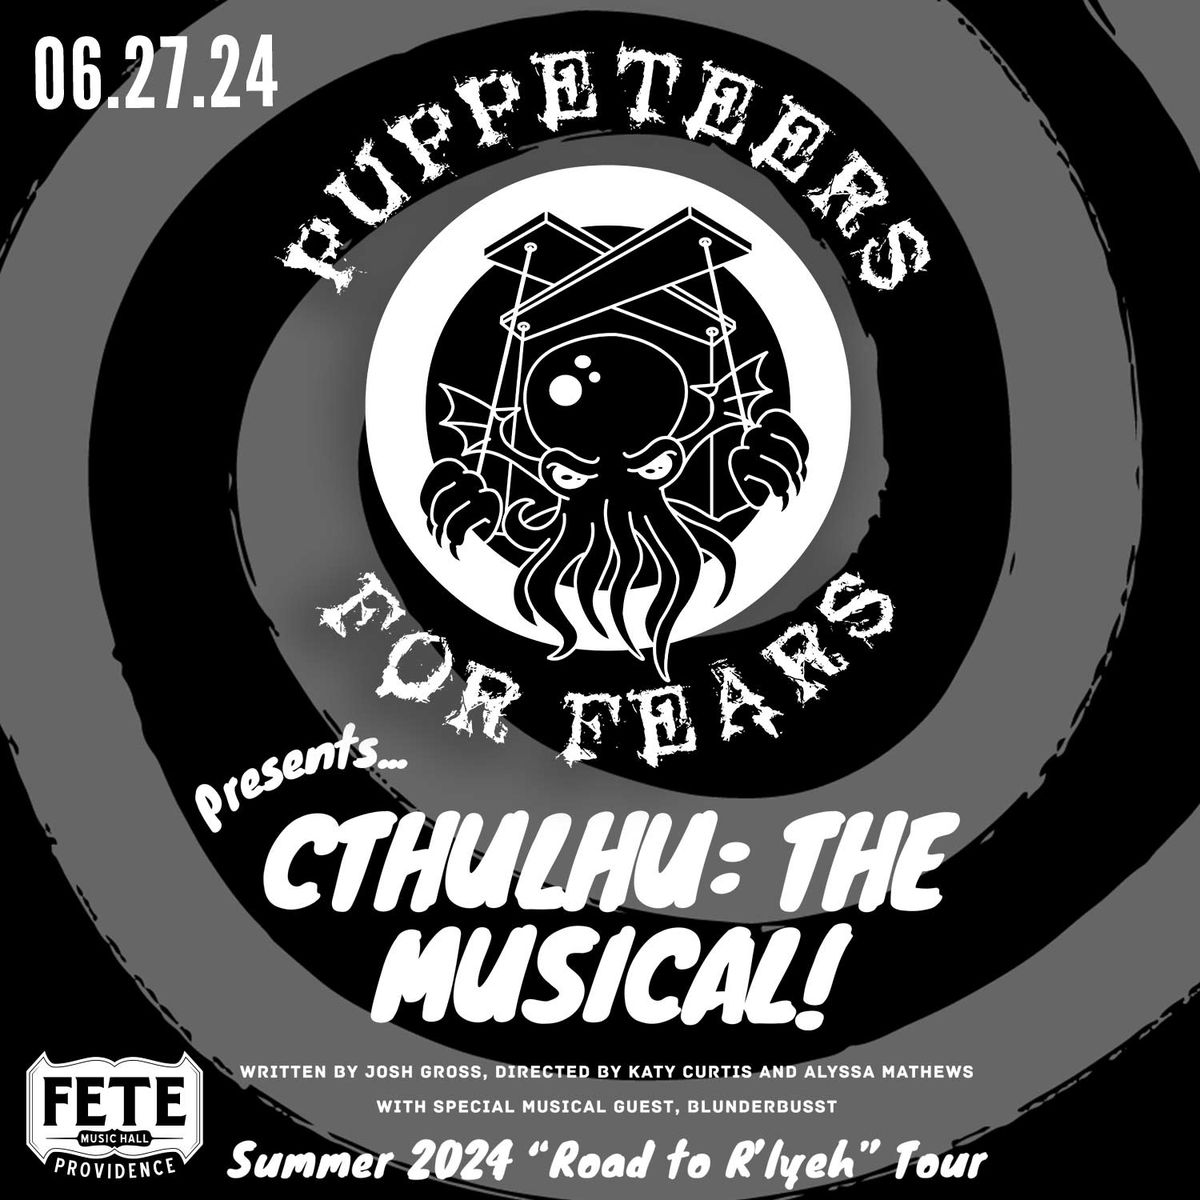 Puppeteers For Fears presents: Cthulhu: The Musical